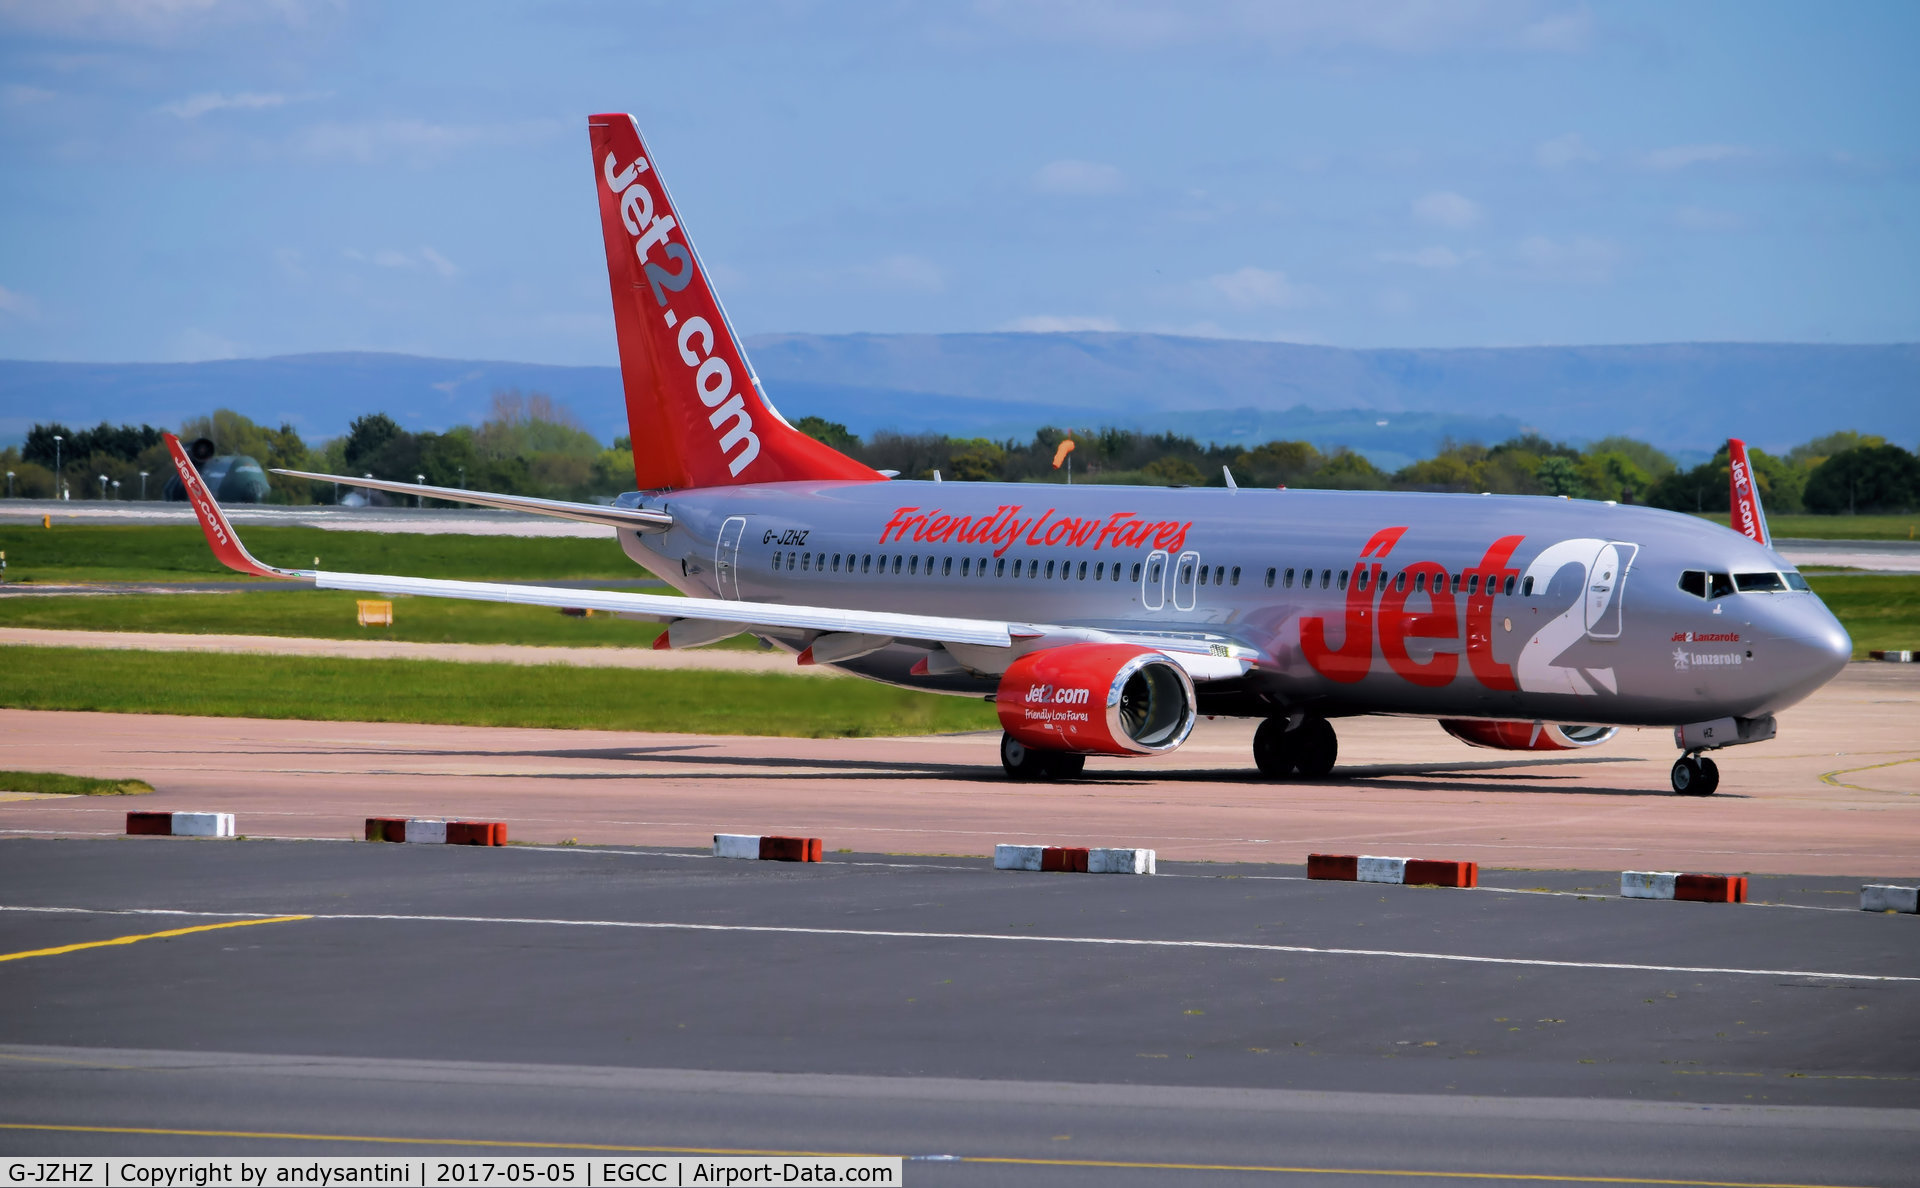 G-JZHZ, 2017 Boeing 737-8MG C/N 63156, taxing out for take off brand new to the JET2 fleet